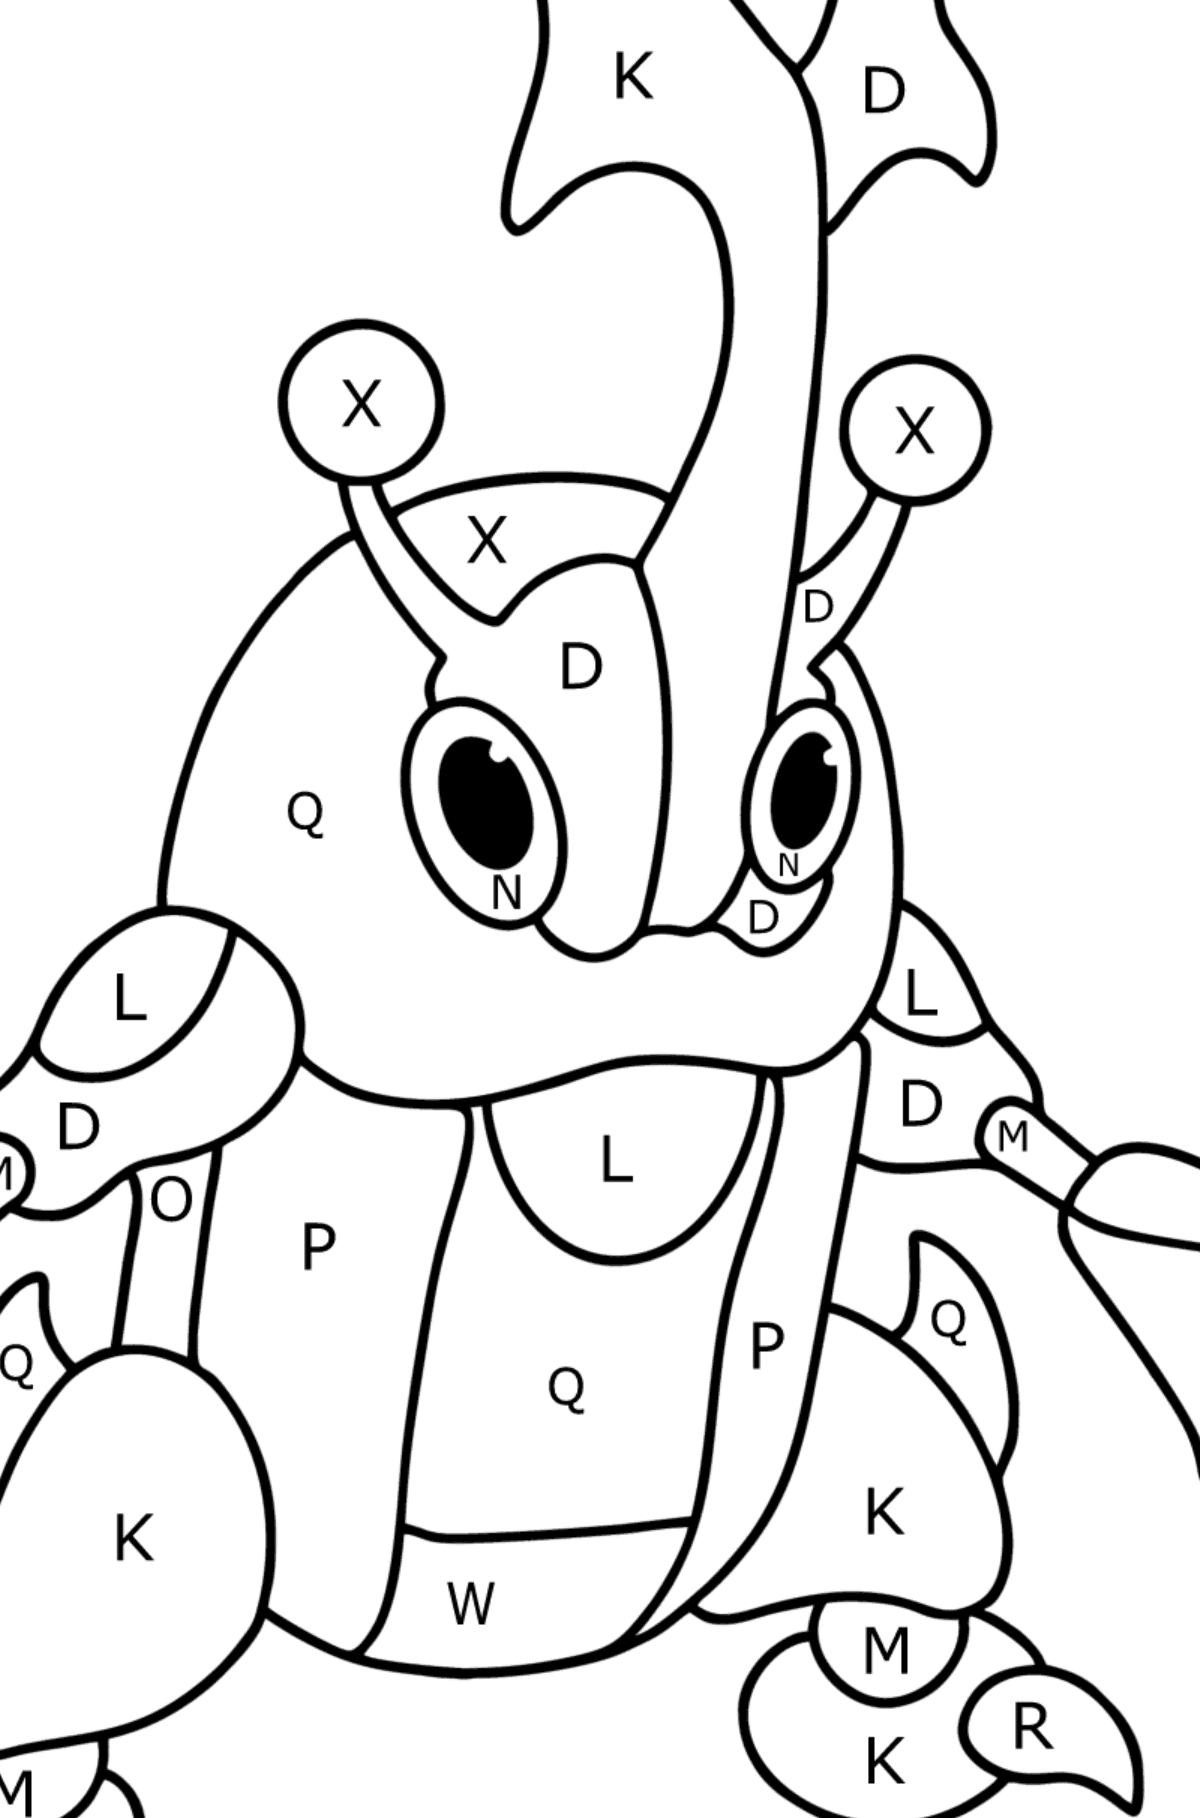 Colouring page Pokémon X and Y Heracross - Coloring by Letters for Kids